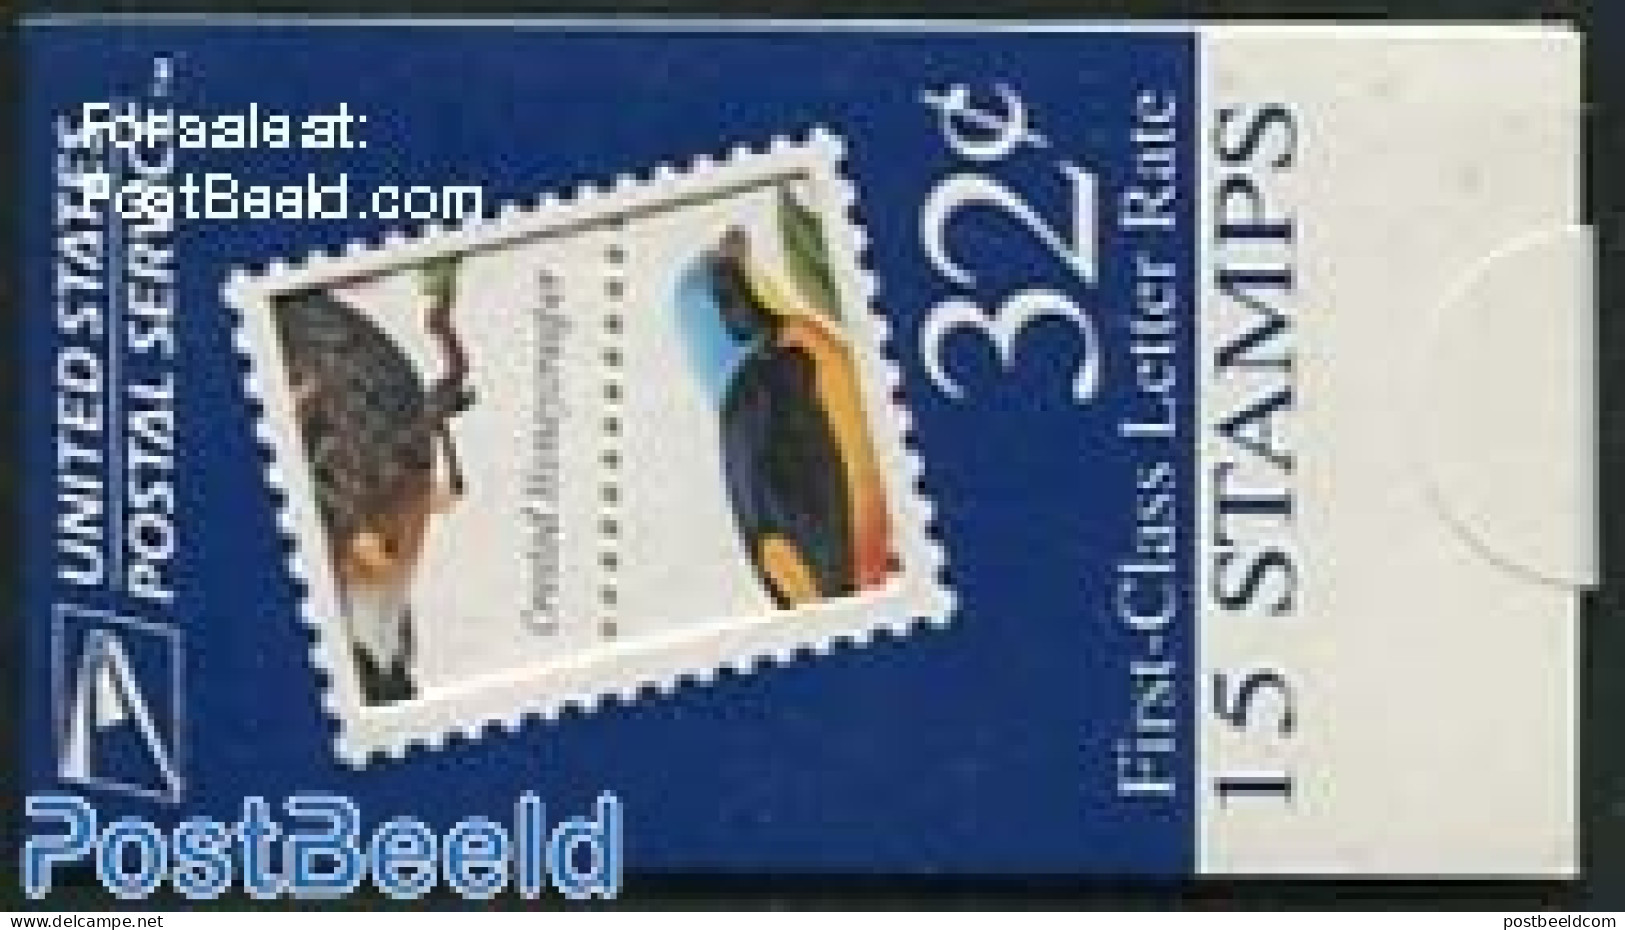 United States Of America 1998 Birds Booklet, Mint NH, Nature - Birds - Stamp Booklets - Ungebraucht